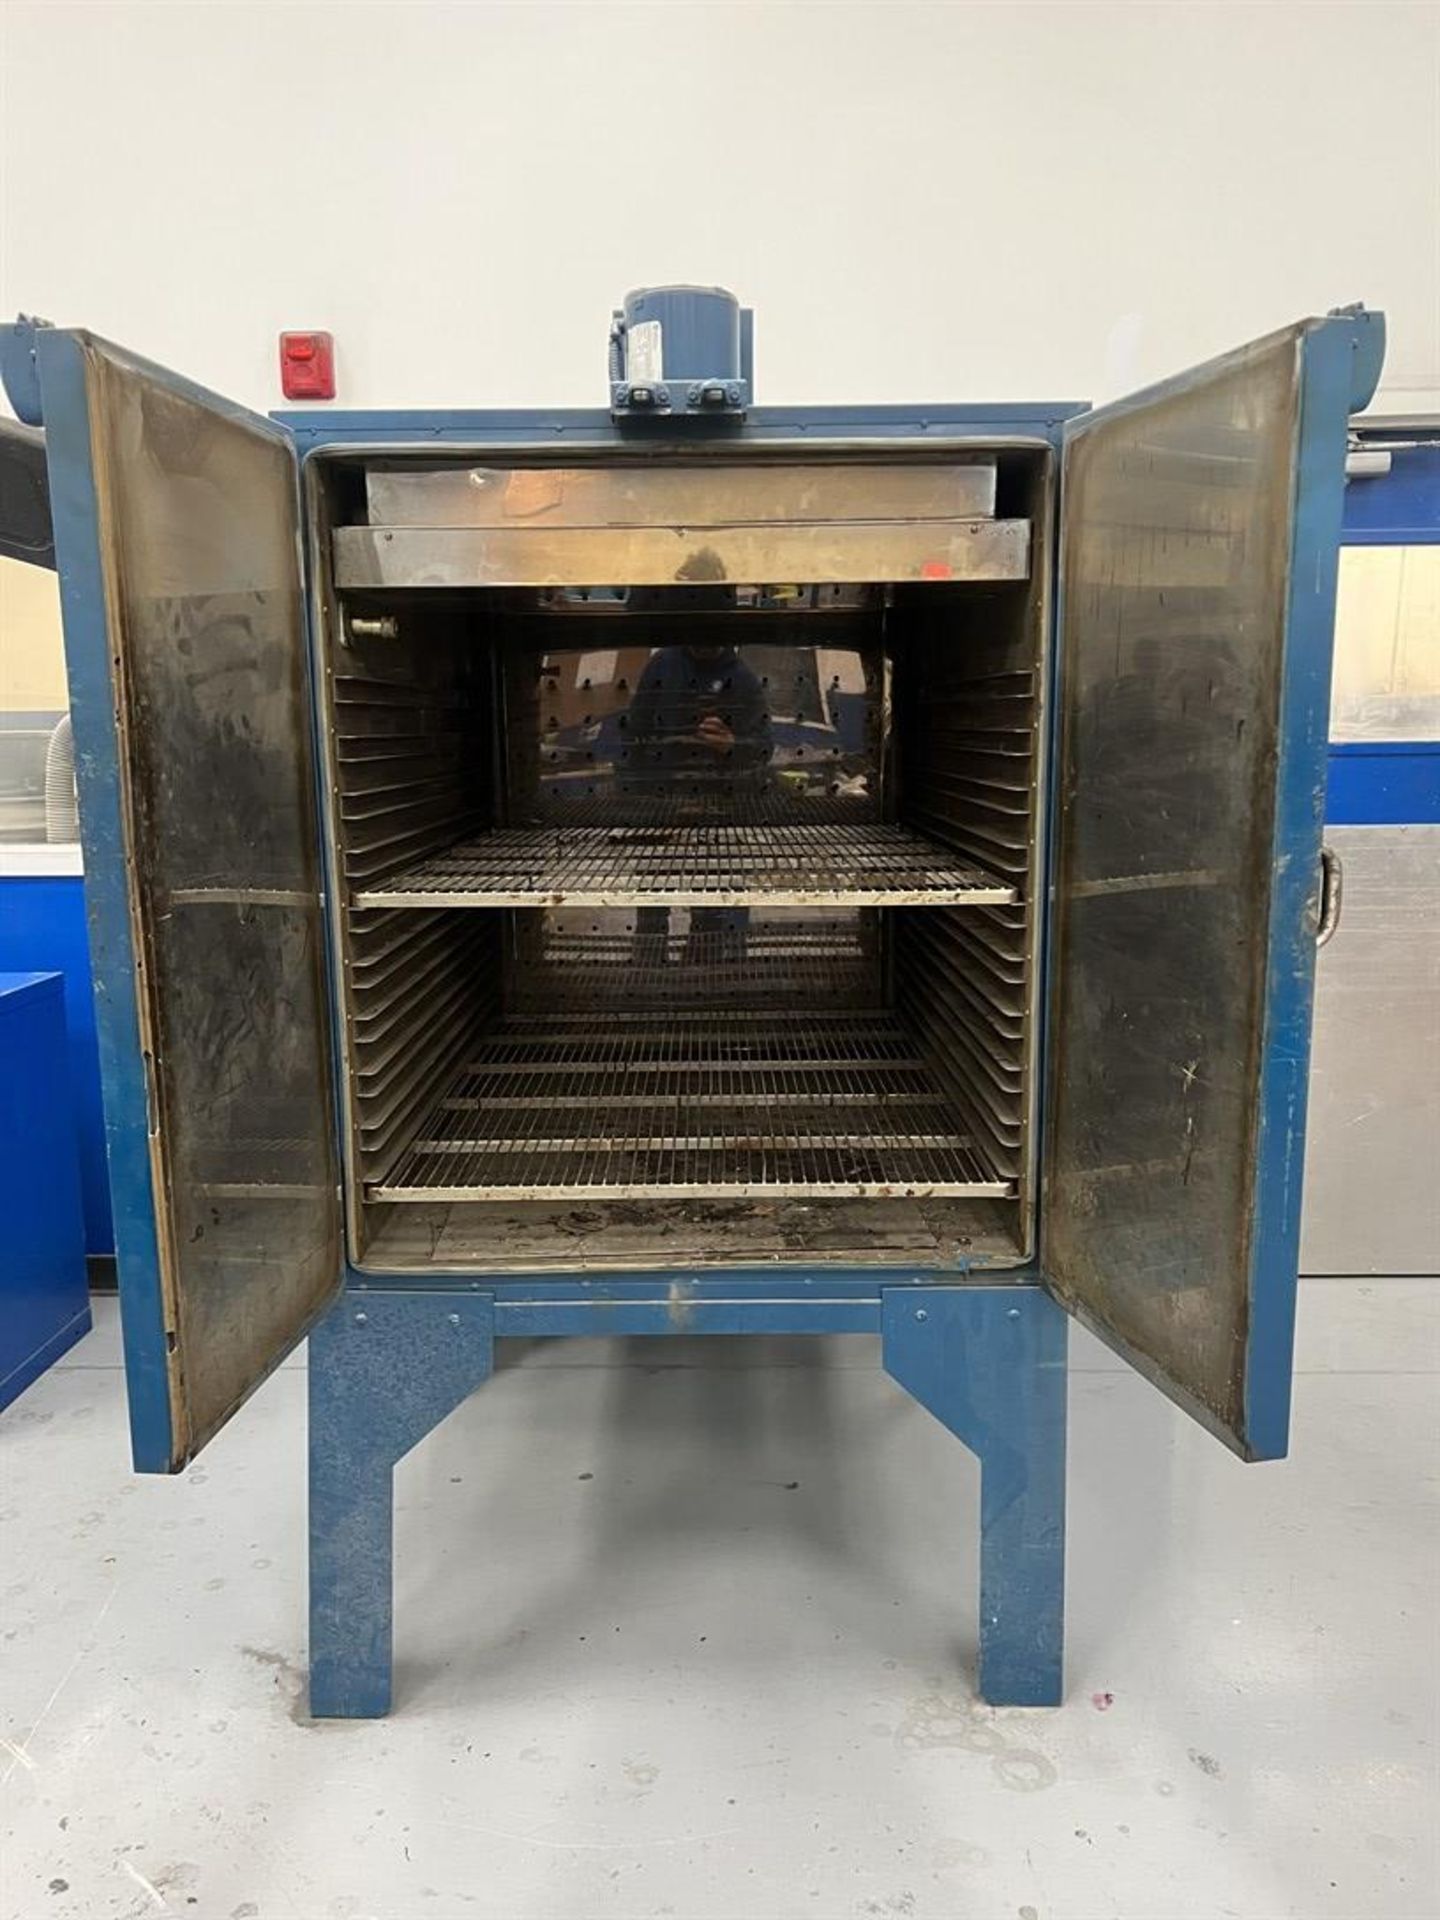 GRIEVE No 343 Oven, s/n 313254, w/ 36”x 48”x 36” Chamber, 36 Cu. Ft. Volume, 400 deg. F - Image 2 of 6